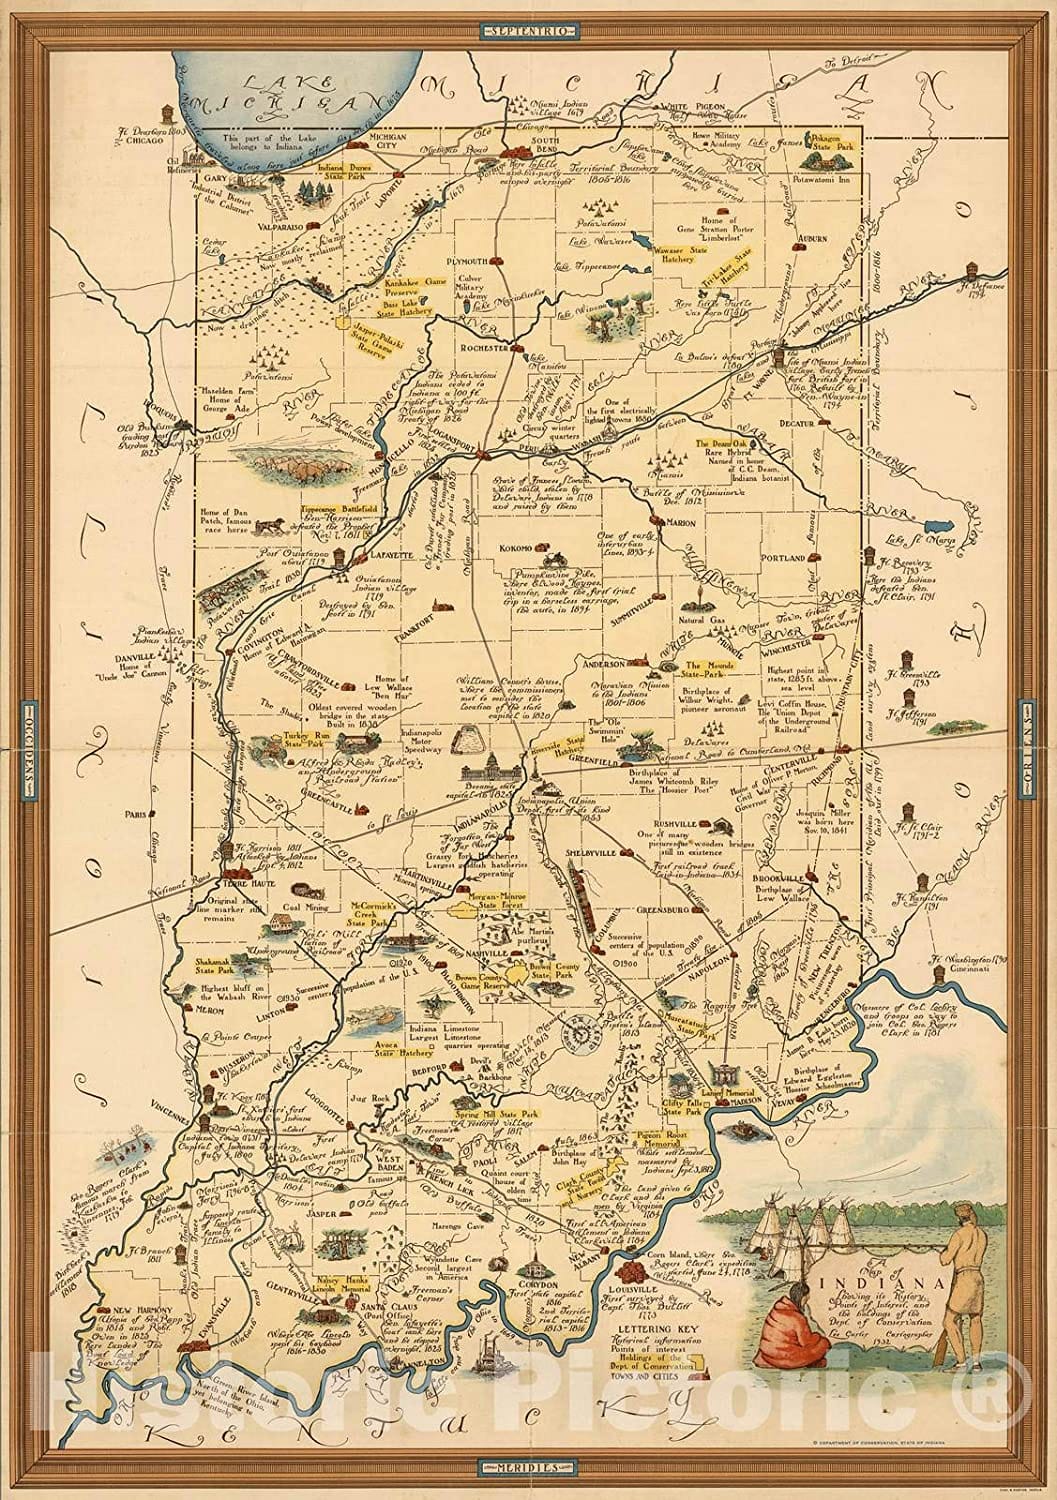 Test -  A Map of Indiana Showing its History, Points of Interest, and The Holdings of The Dept. of Conservation, 1932 - Vintage Wall Art - 16in x 24in